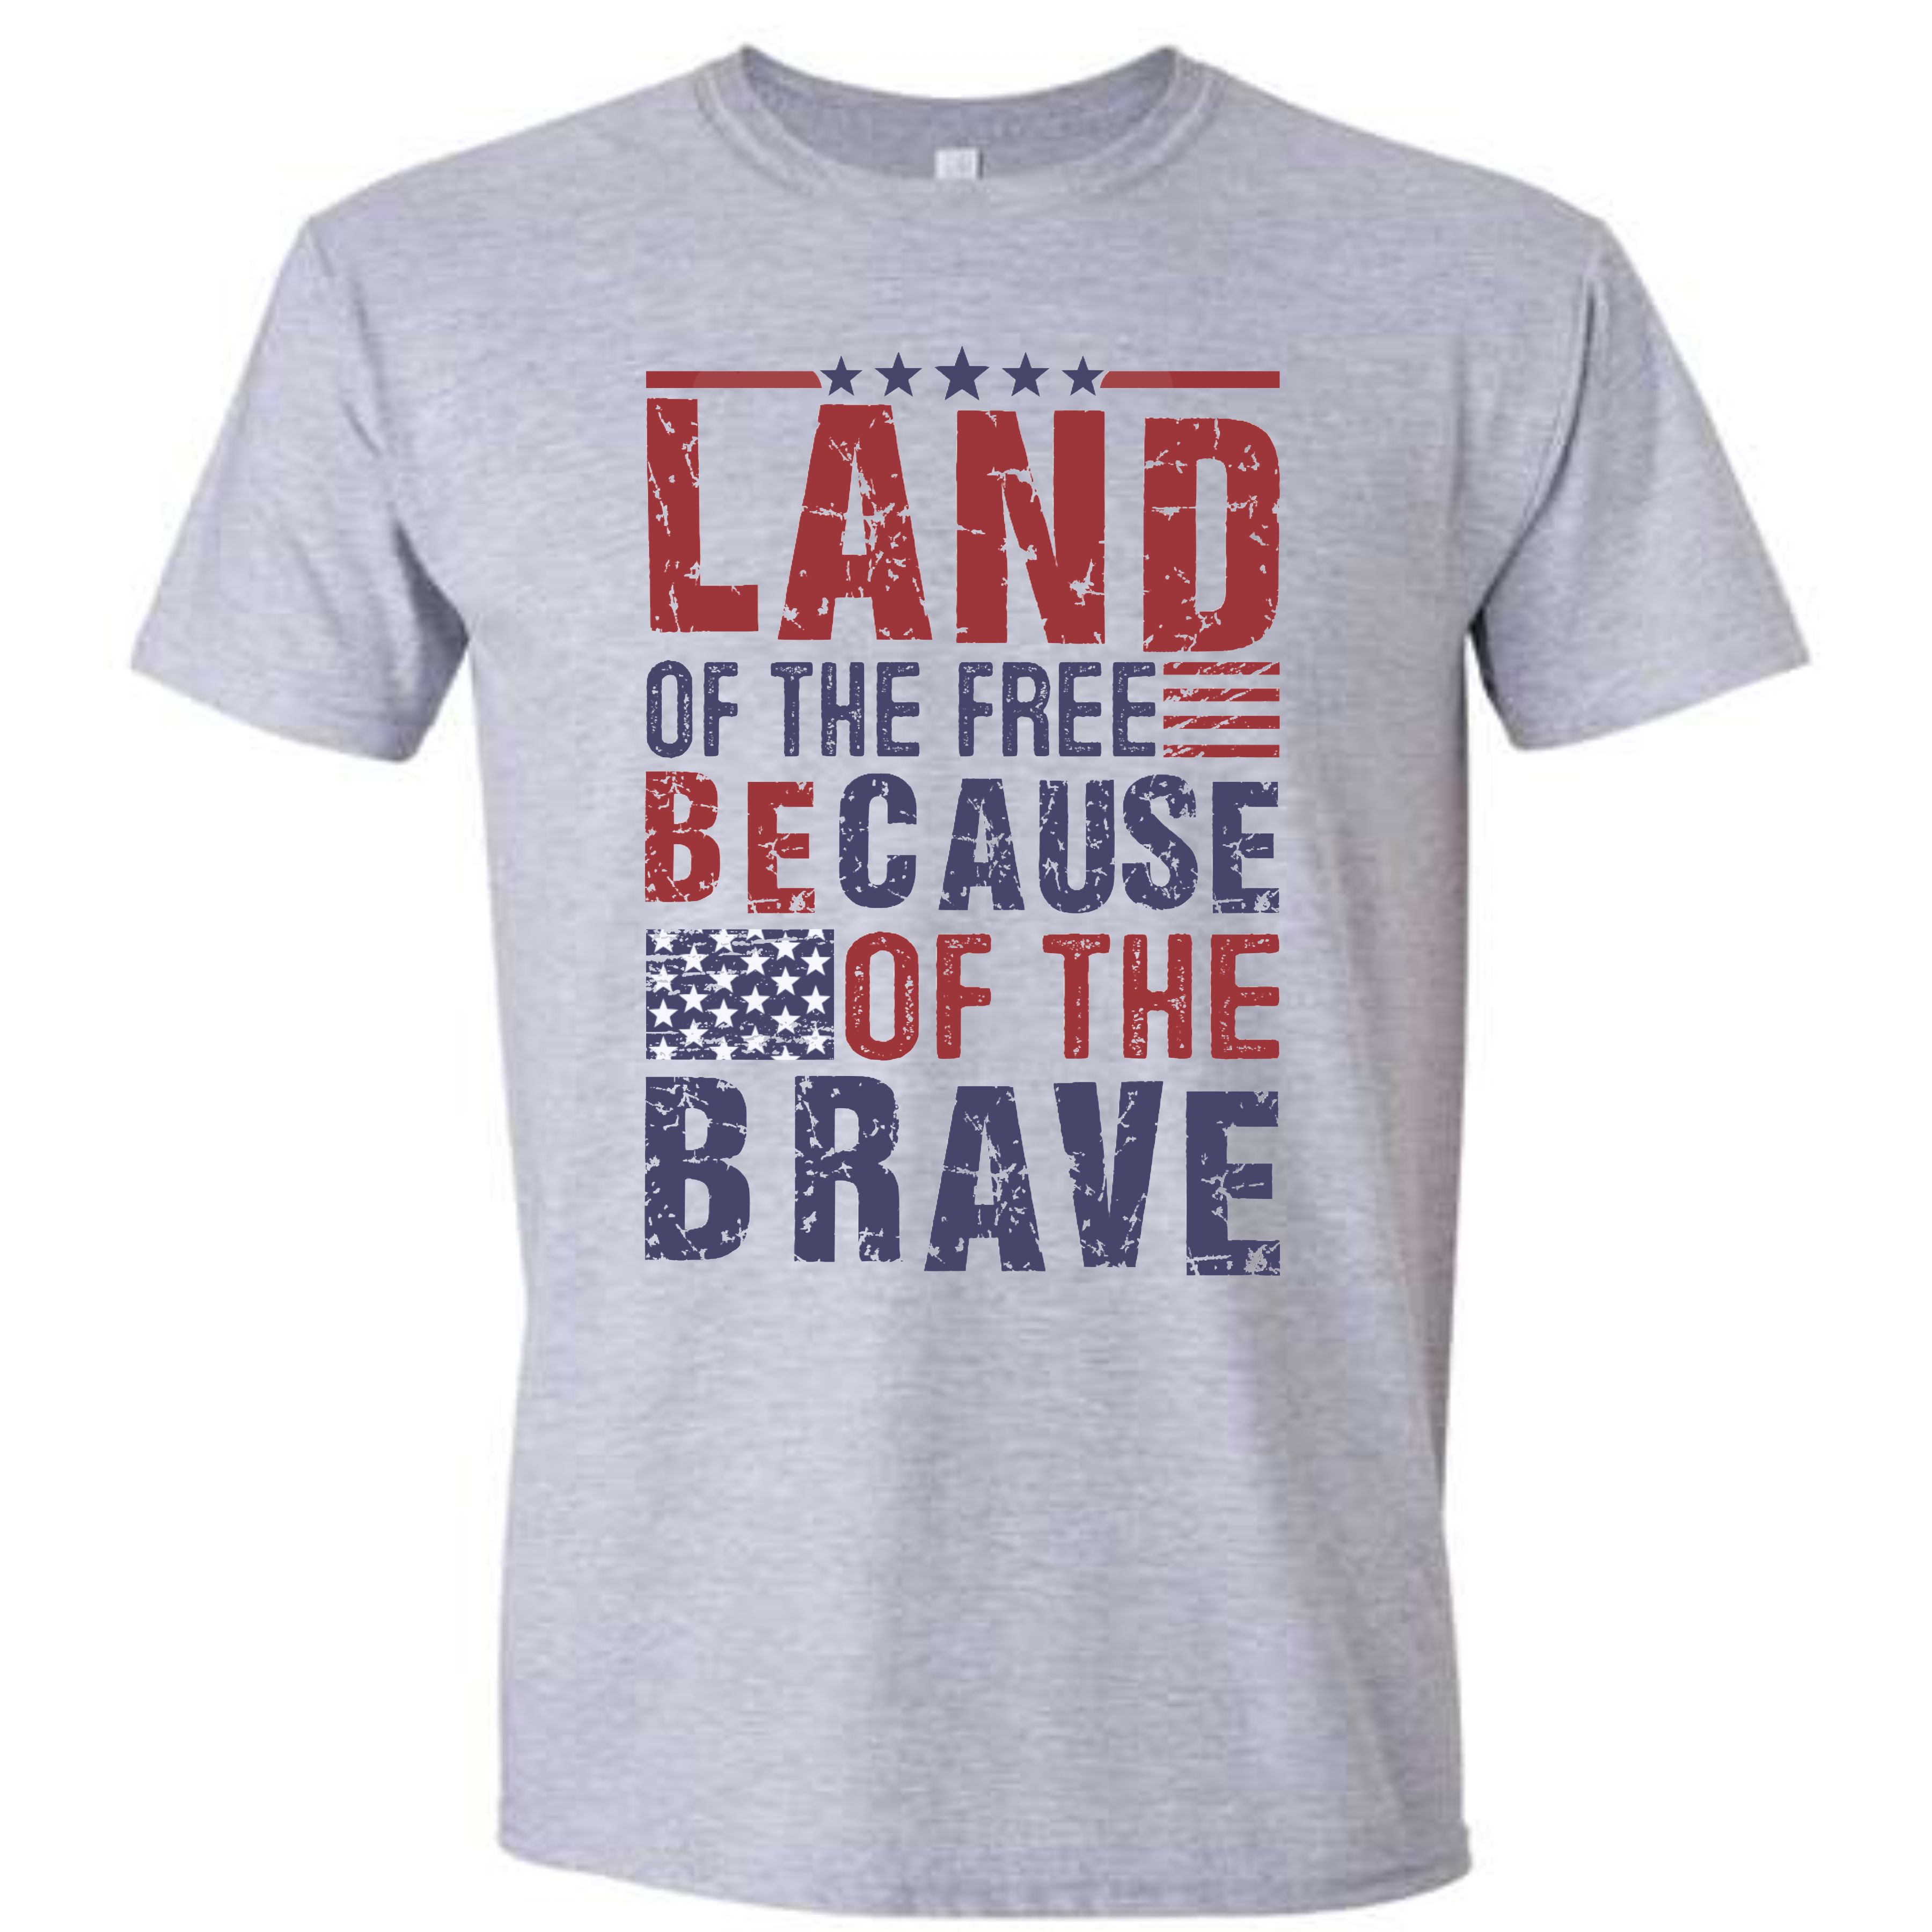 Because of the Brave Tee #64000 Sport Grey